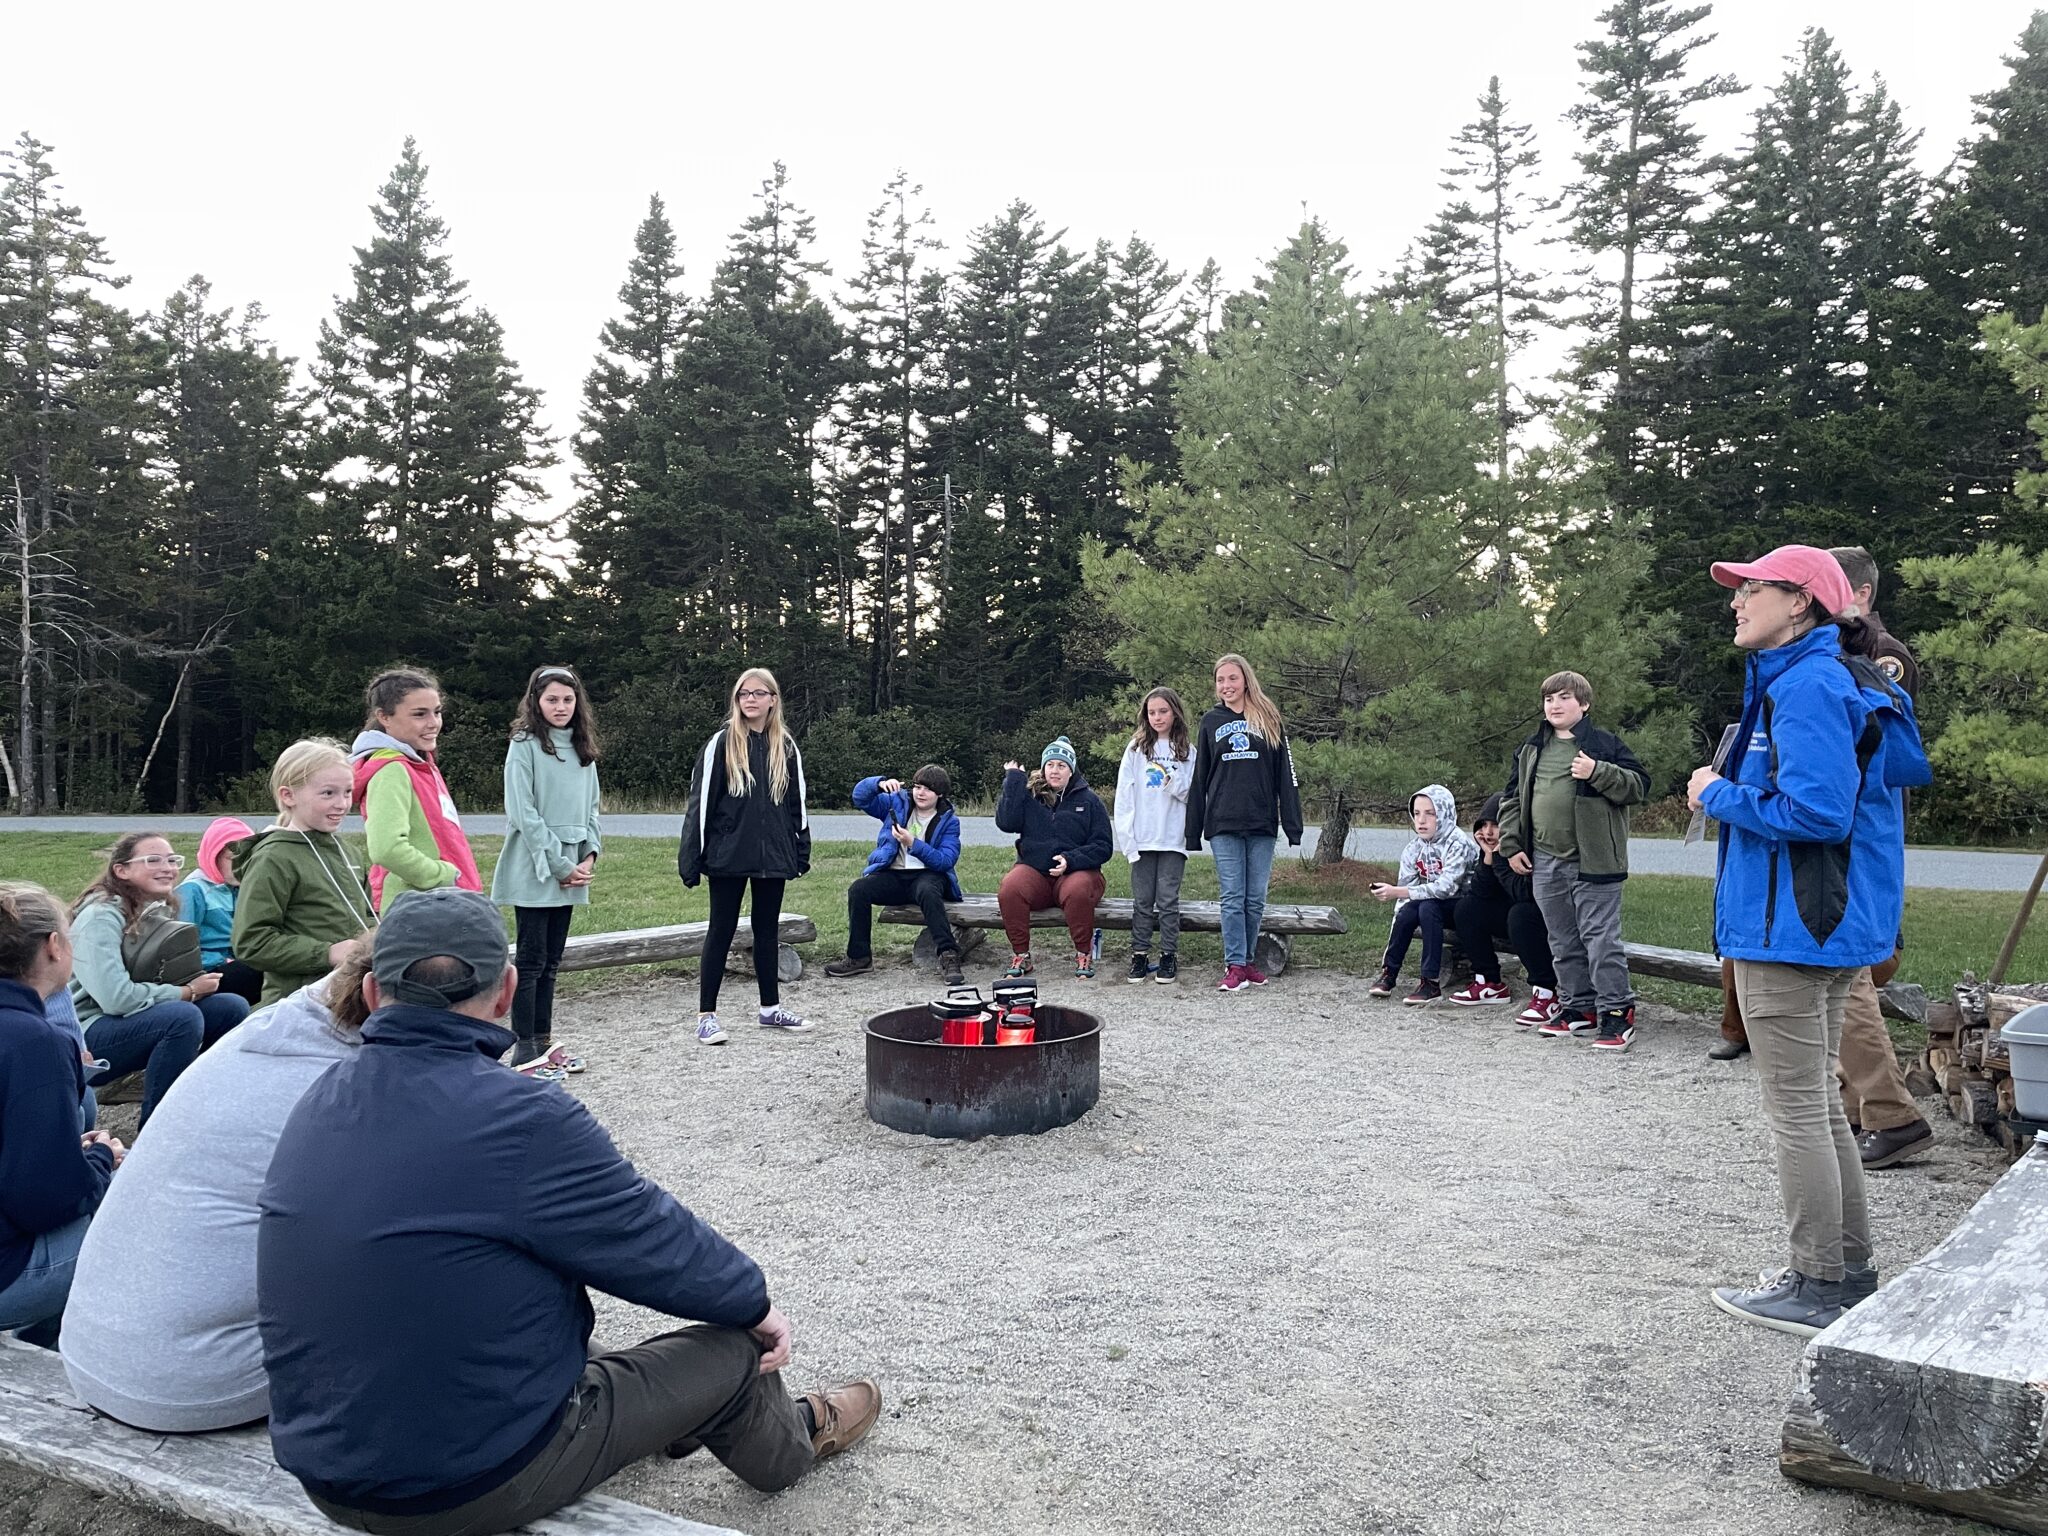 View of middle school students as part of the Schoodic Education Adventure program sitting around a campfire area on the Schoodic Institute campus. 